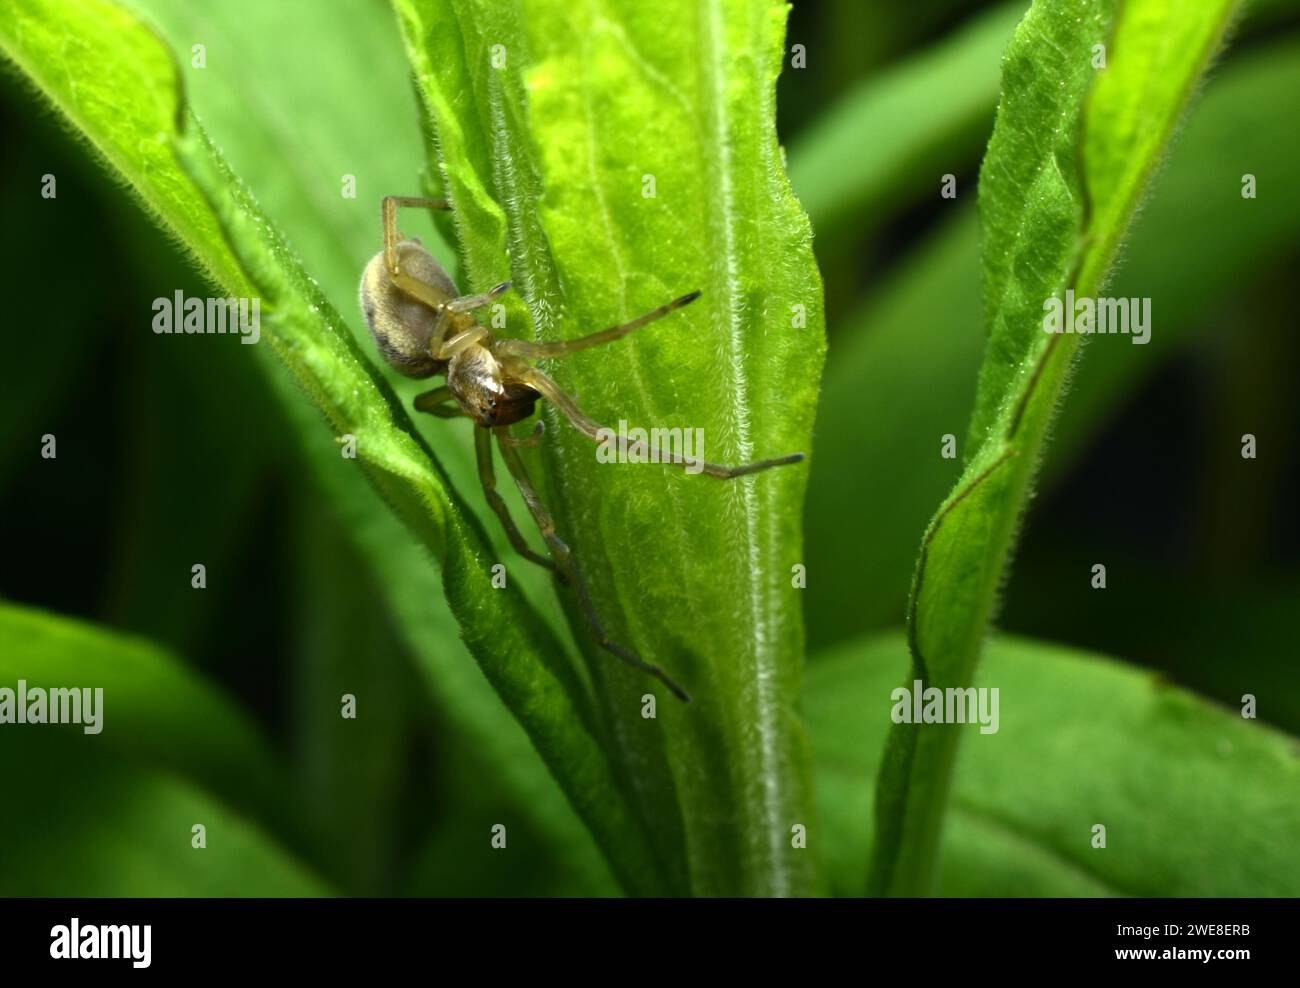 The Agelena labyrinthica spider hides among the leaves of a plant, waiting for prey. Stock Photo